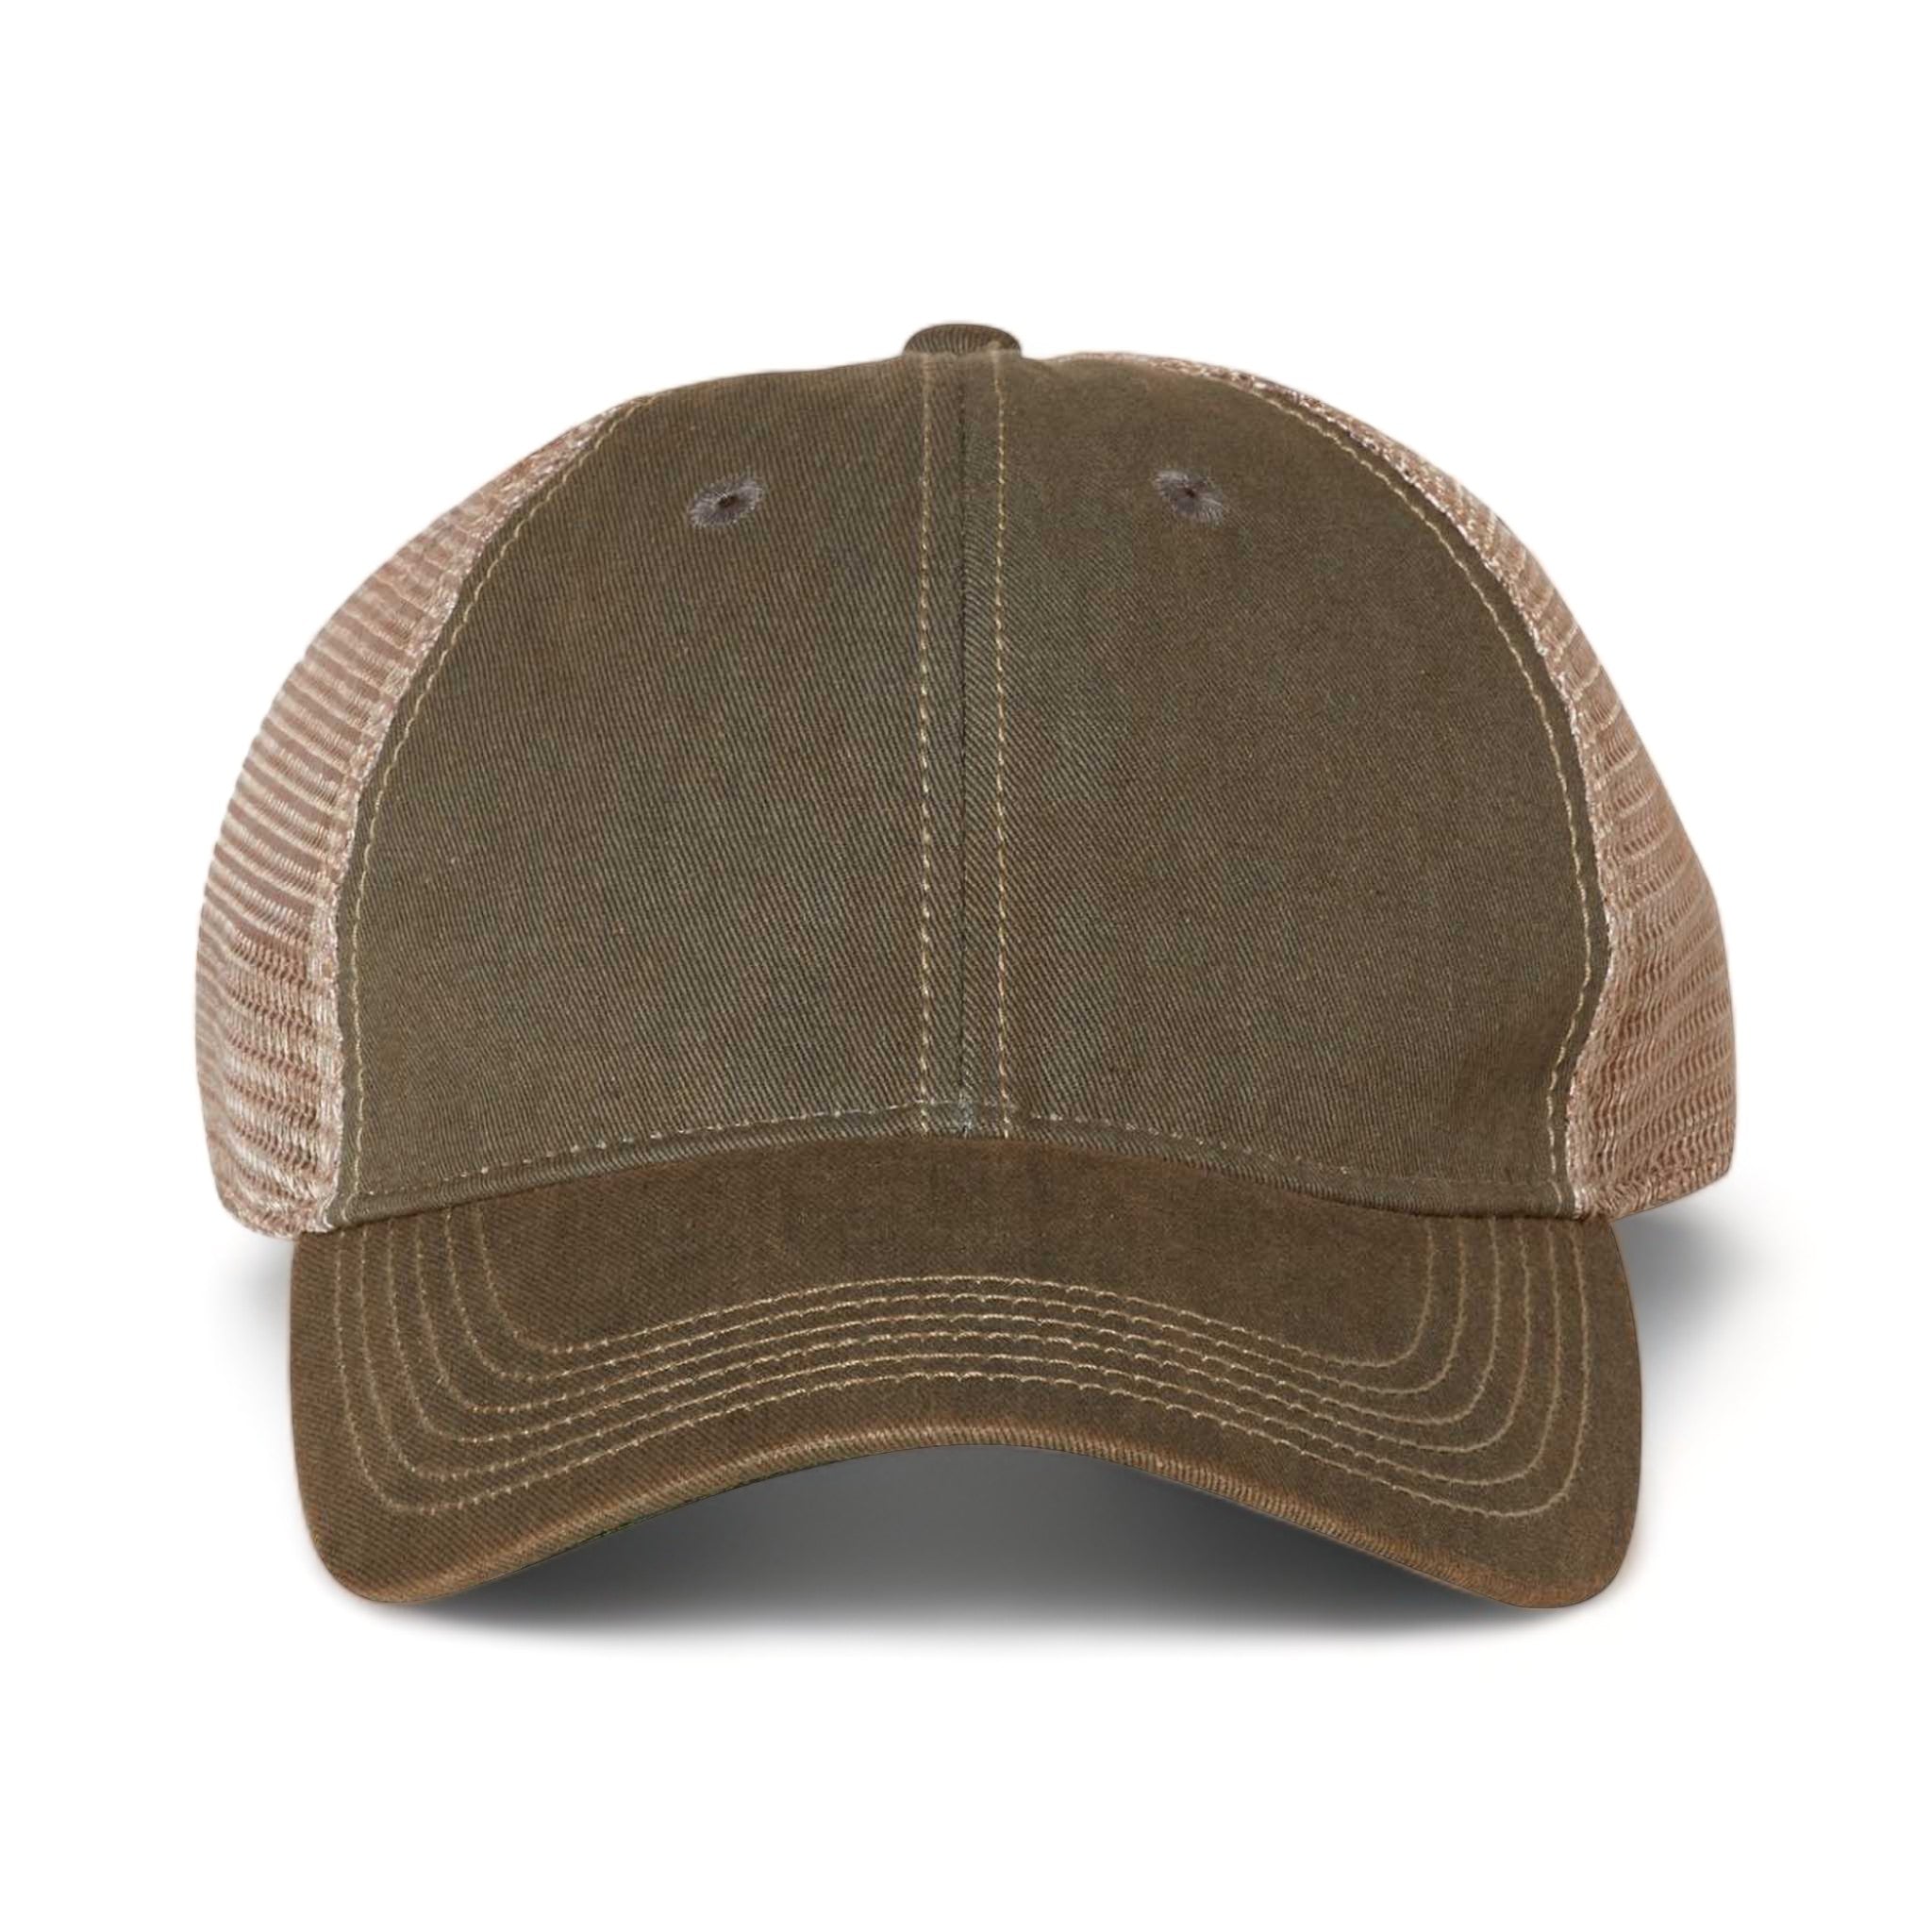 Front view of LEGACY OFA custom hat in grey and khaki